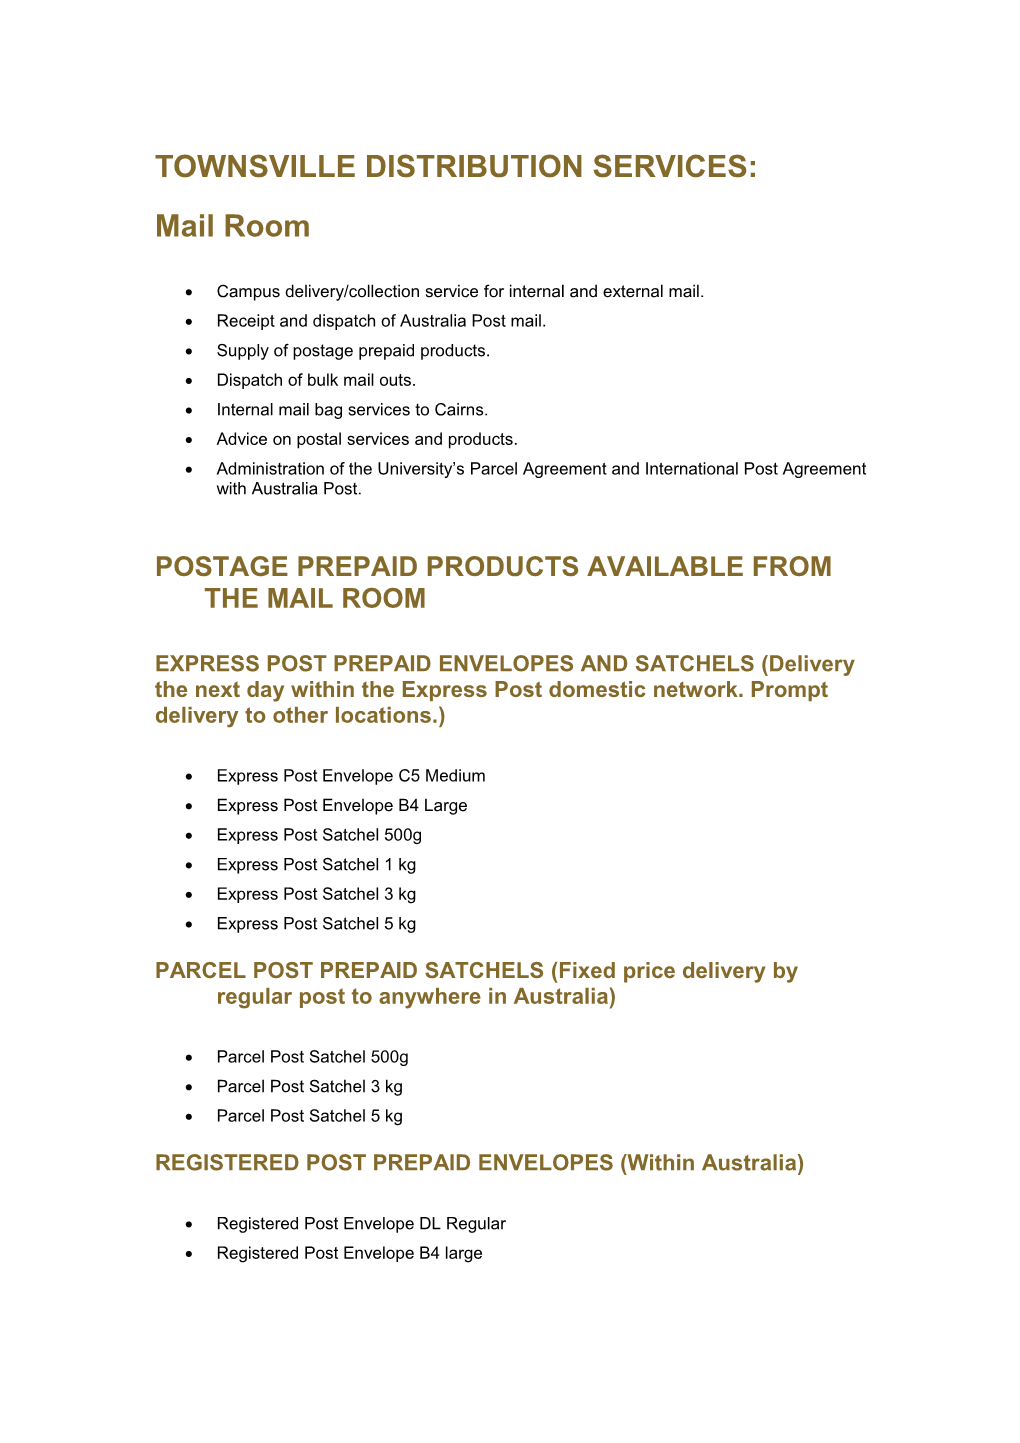 Townsville Distribution Services